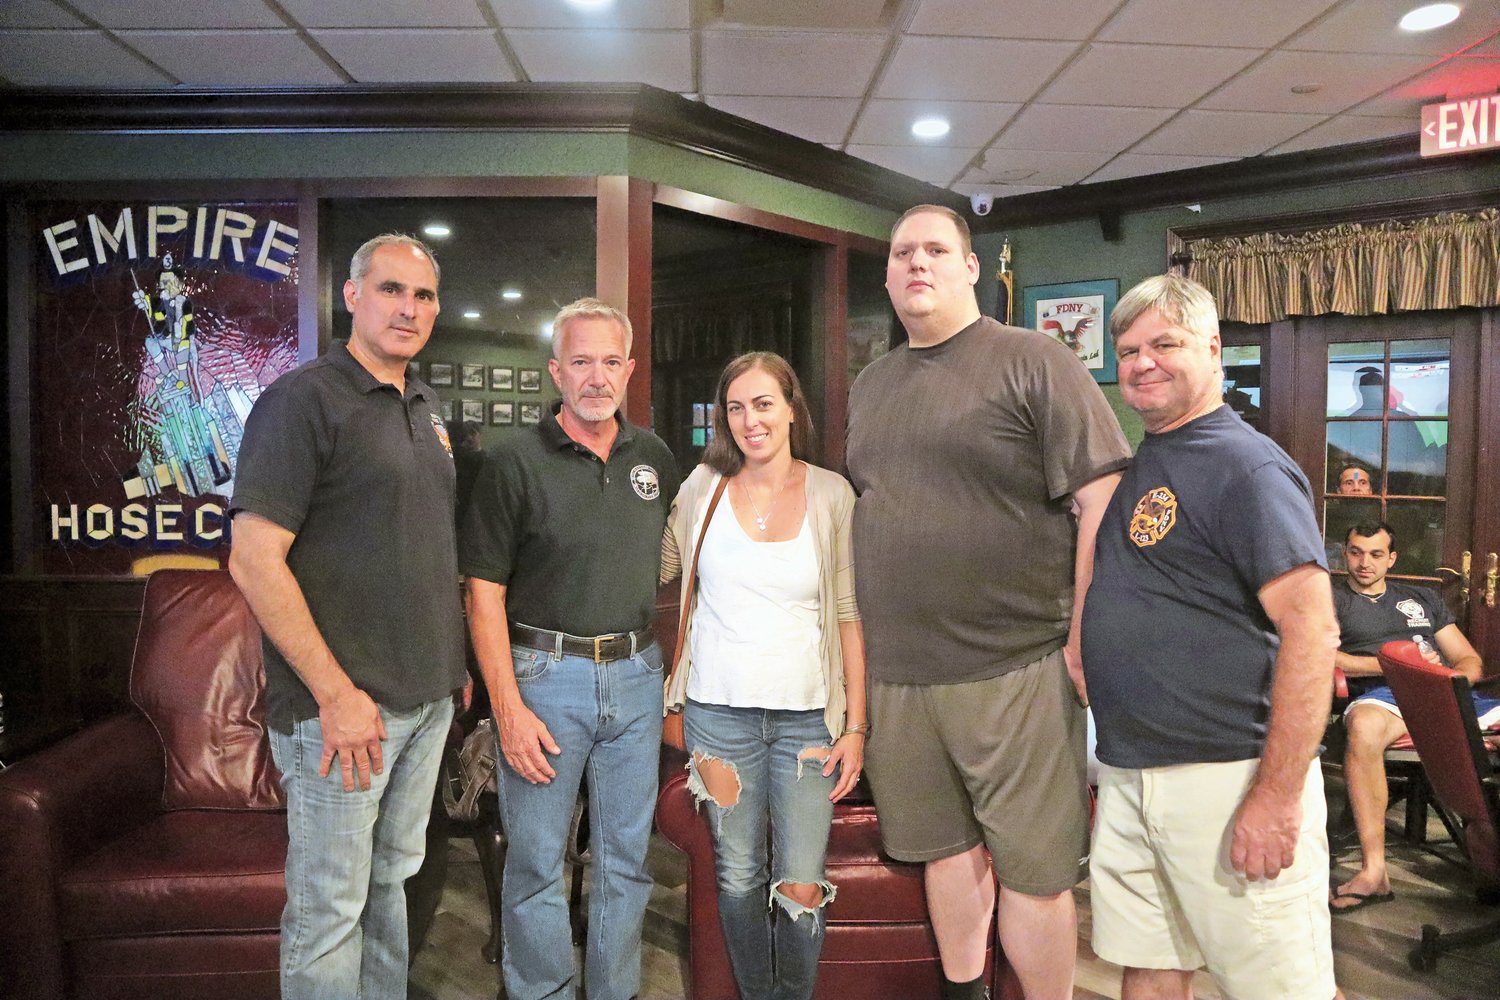 Former MFD Chief Ron Luparello, left, EMT Crystal Desiano, firefighter Tim Reid and former Capt. Kevin Stress, with Gary Harrington, second from left, at the Q & A at Empire Hose Company.